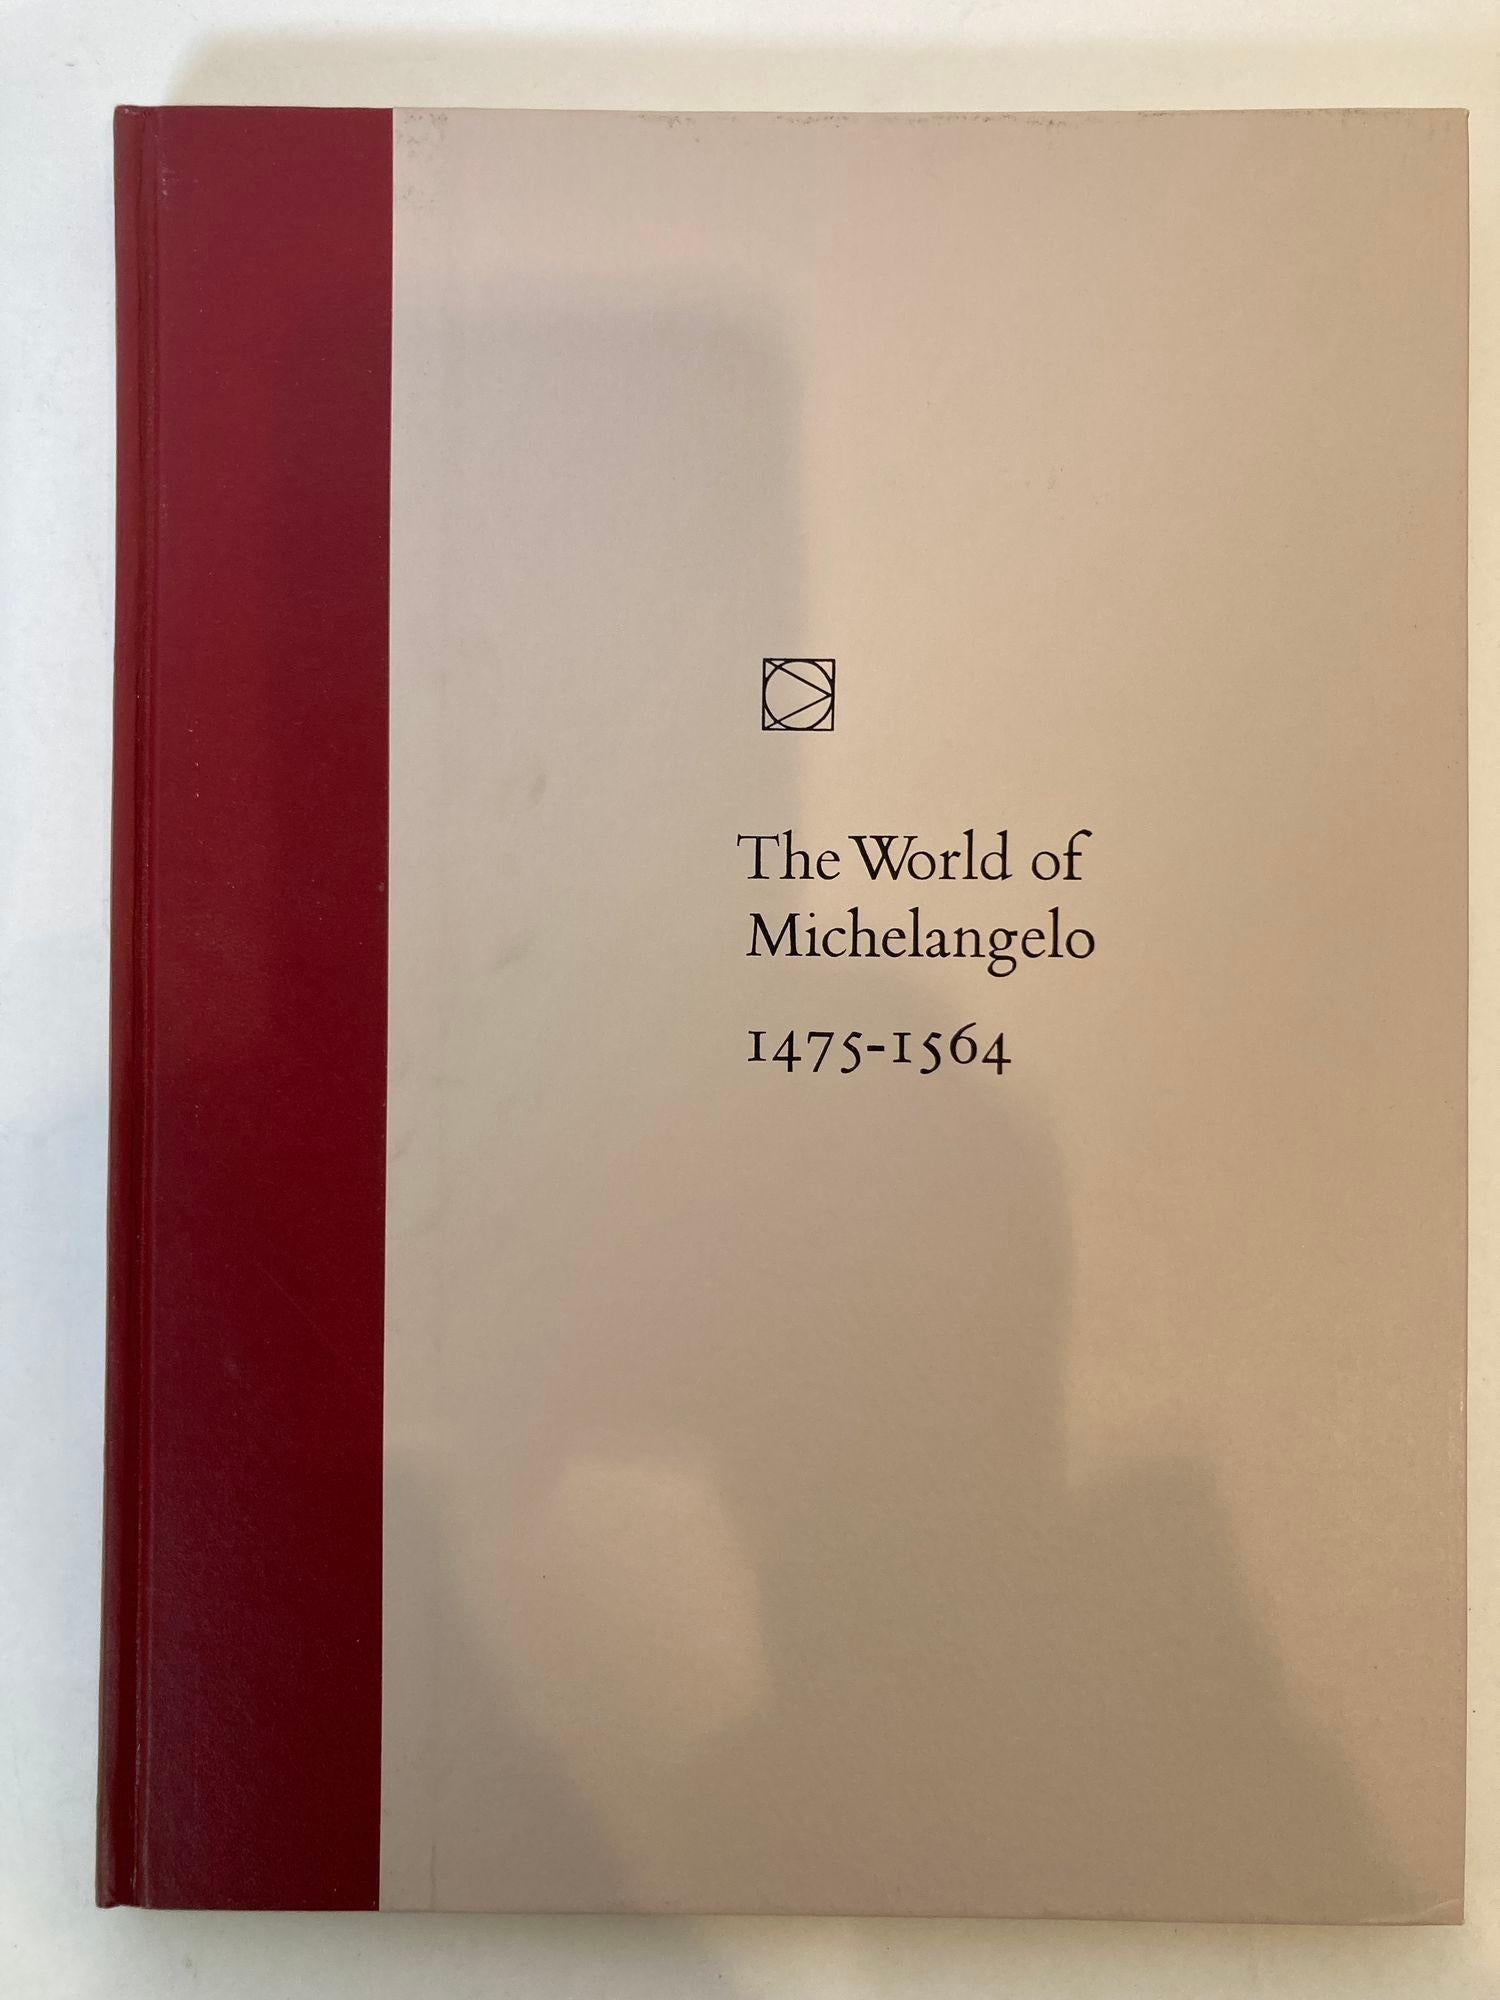 The world of Michelangelo 1475-1564
by Robert Coughlan and The Editors of Time-Life Books Published by Time Incorporated, New York, NY, 1966.
Title: The World of Michelangelo 1475-1564
Publisher: Time Incorporated, New York, NY
Publication Date: